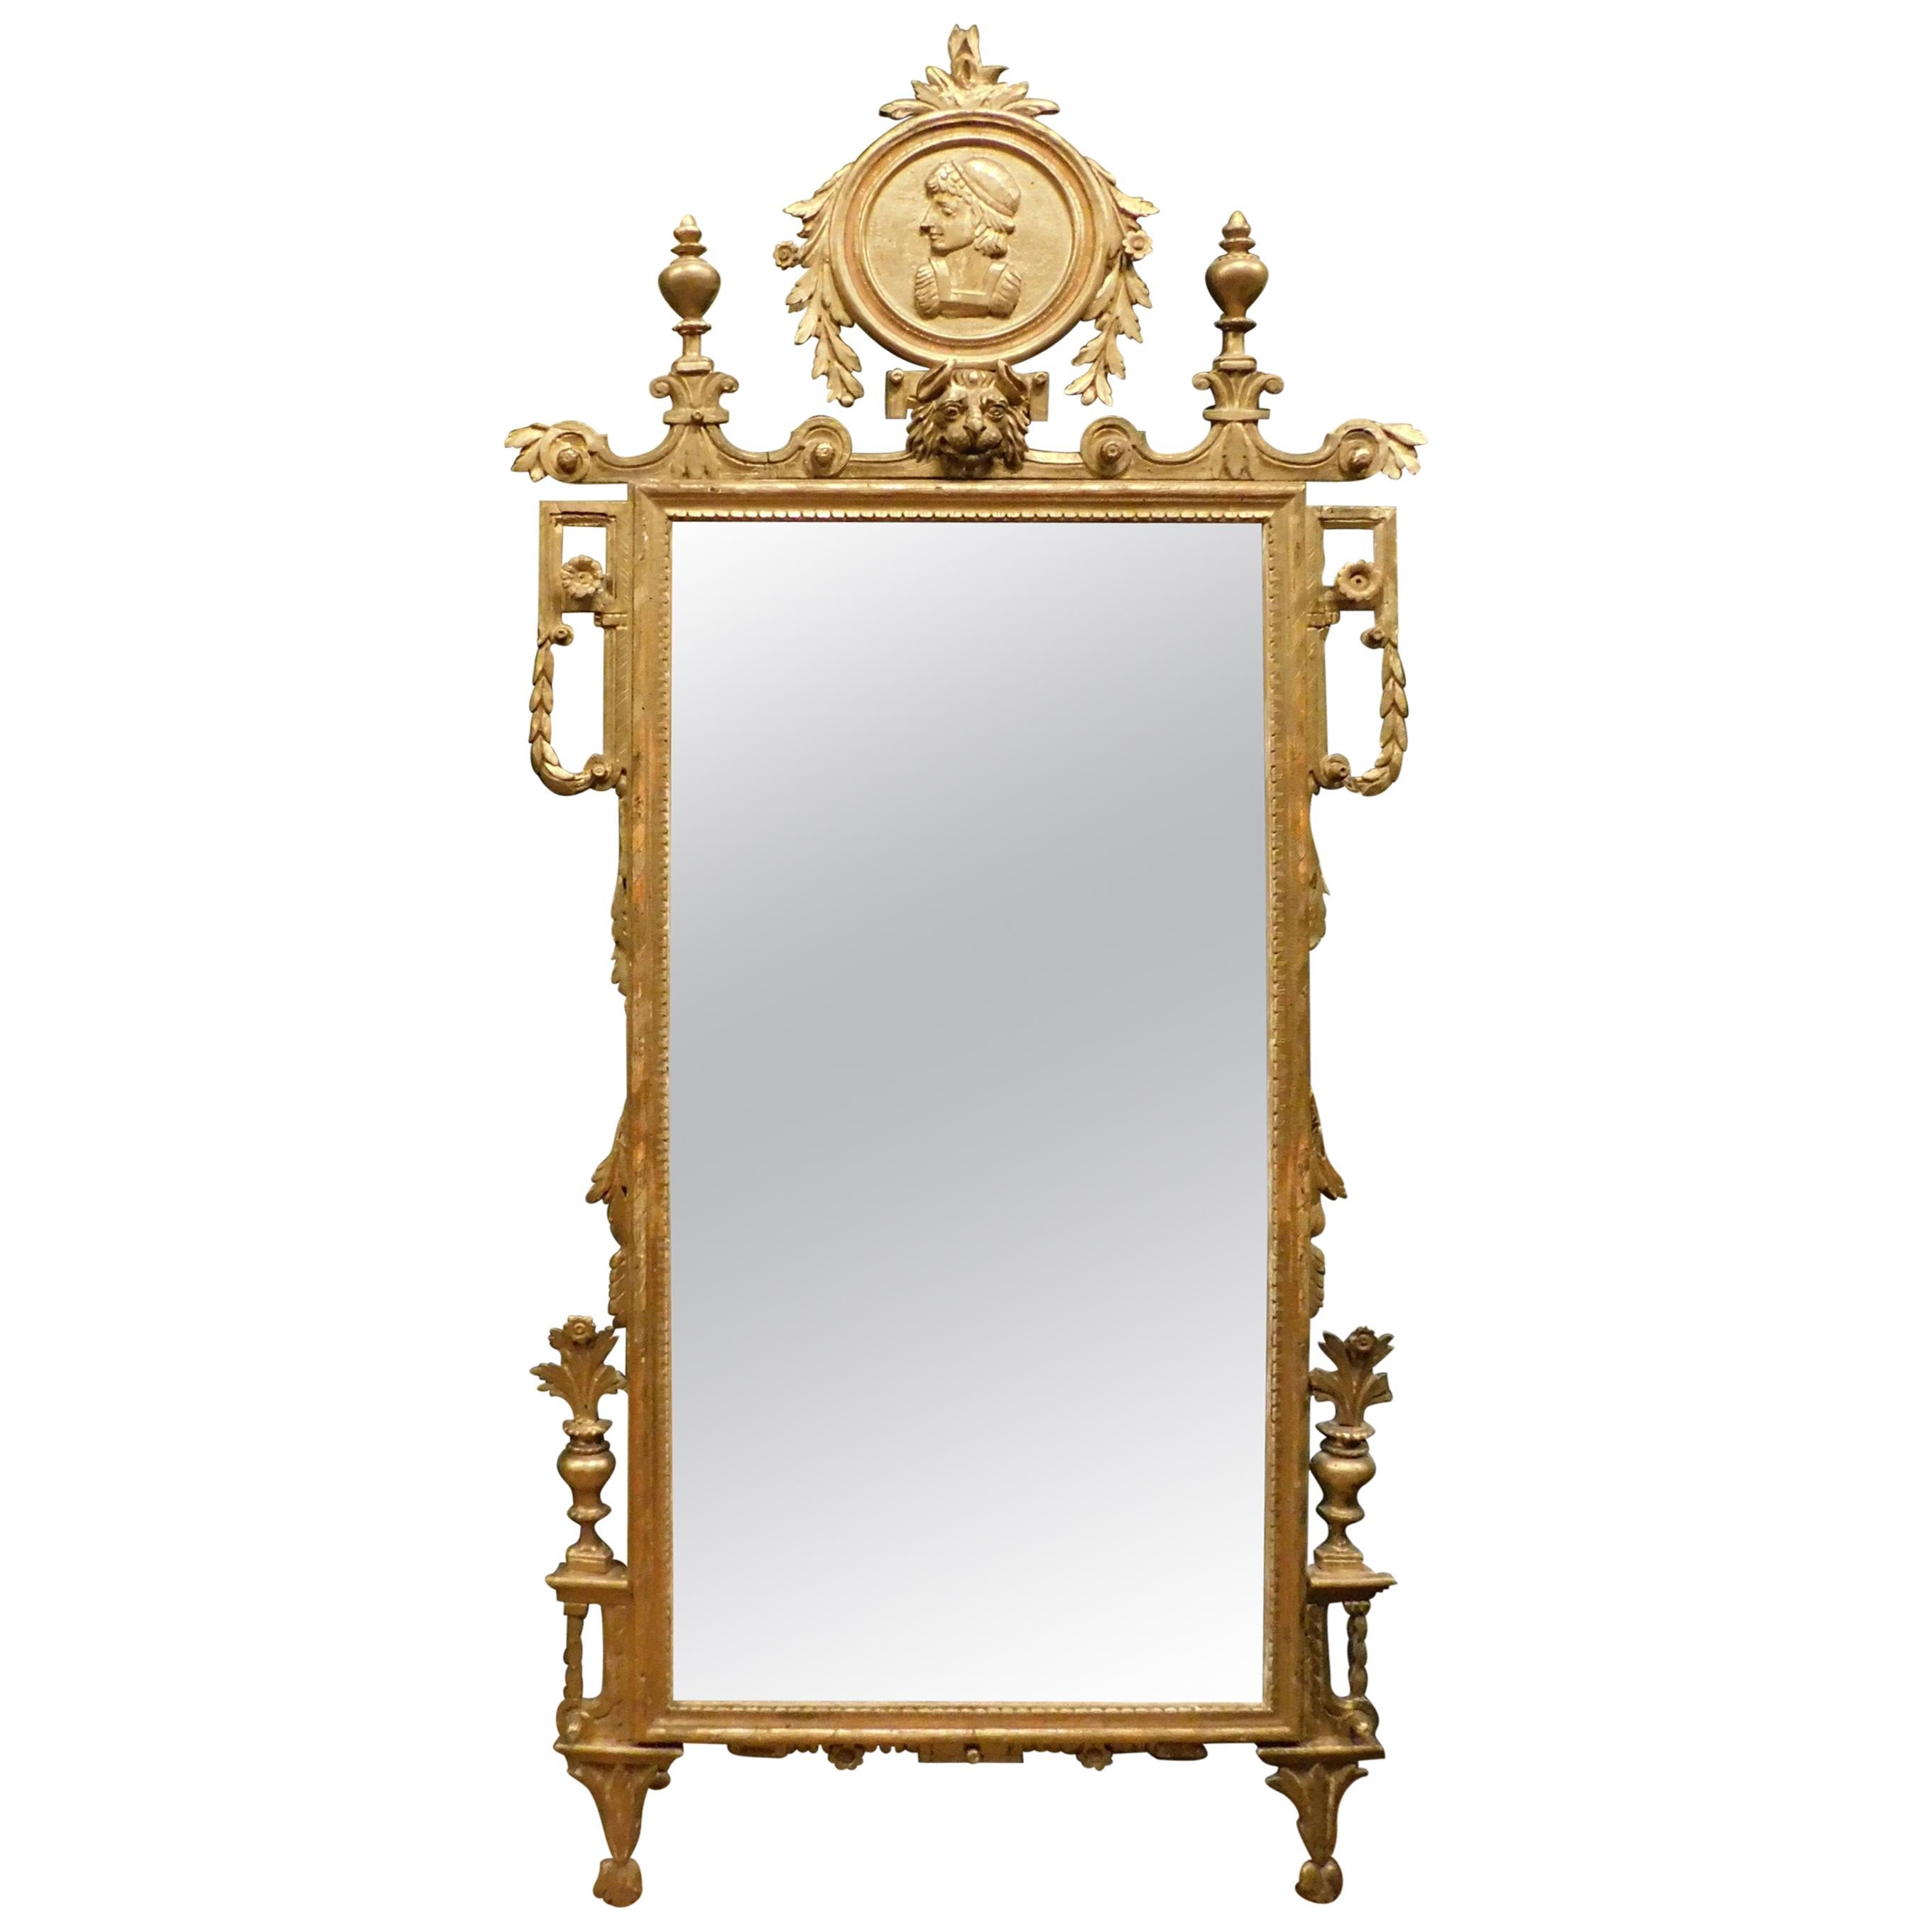 Antique Mirror in Gilded and Richly Carved Wood, 18th Century Florence 'Italy'